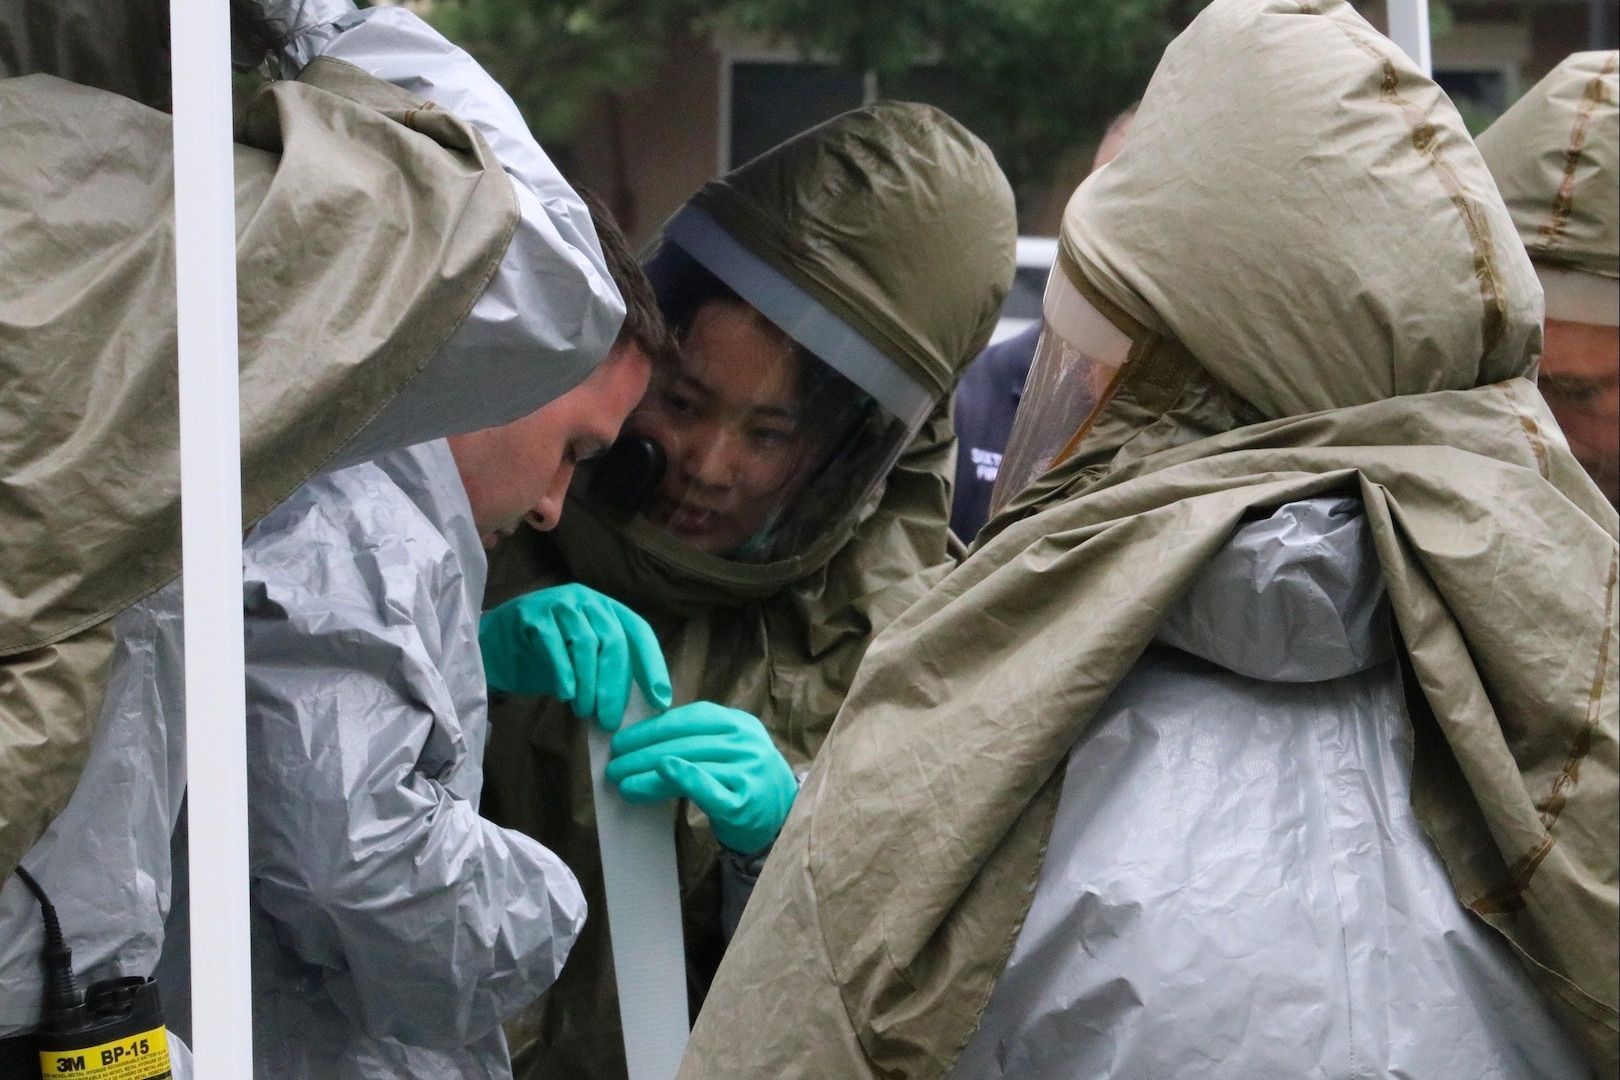 BAMC Decon team trains for potential disasters